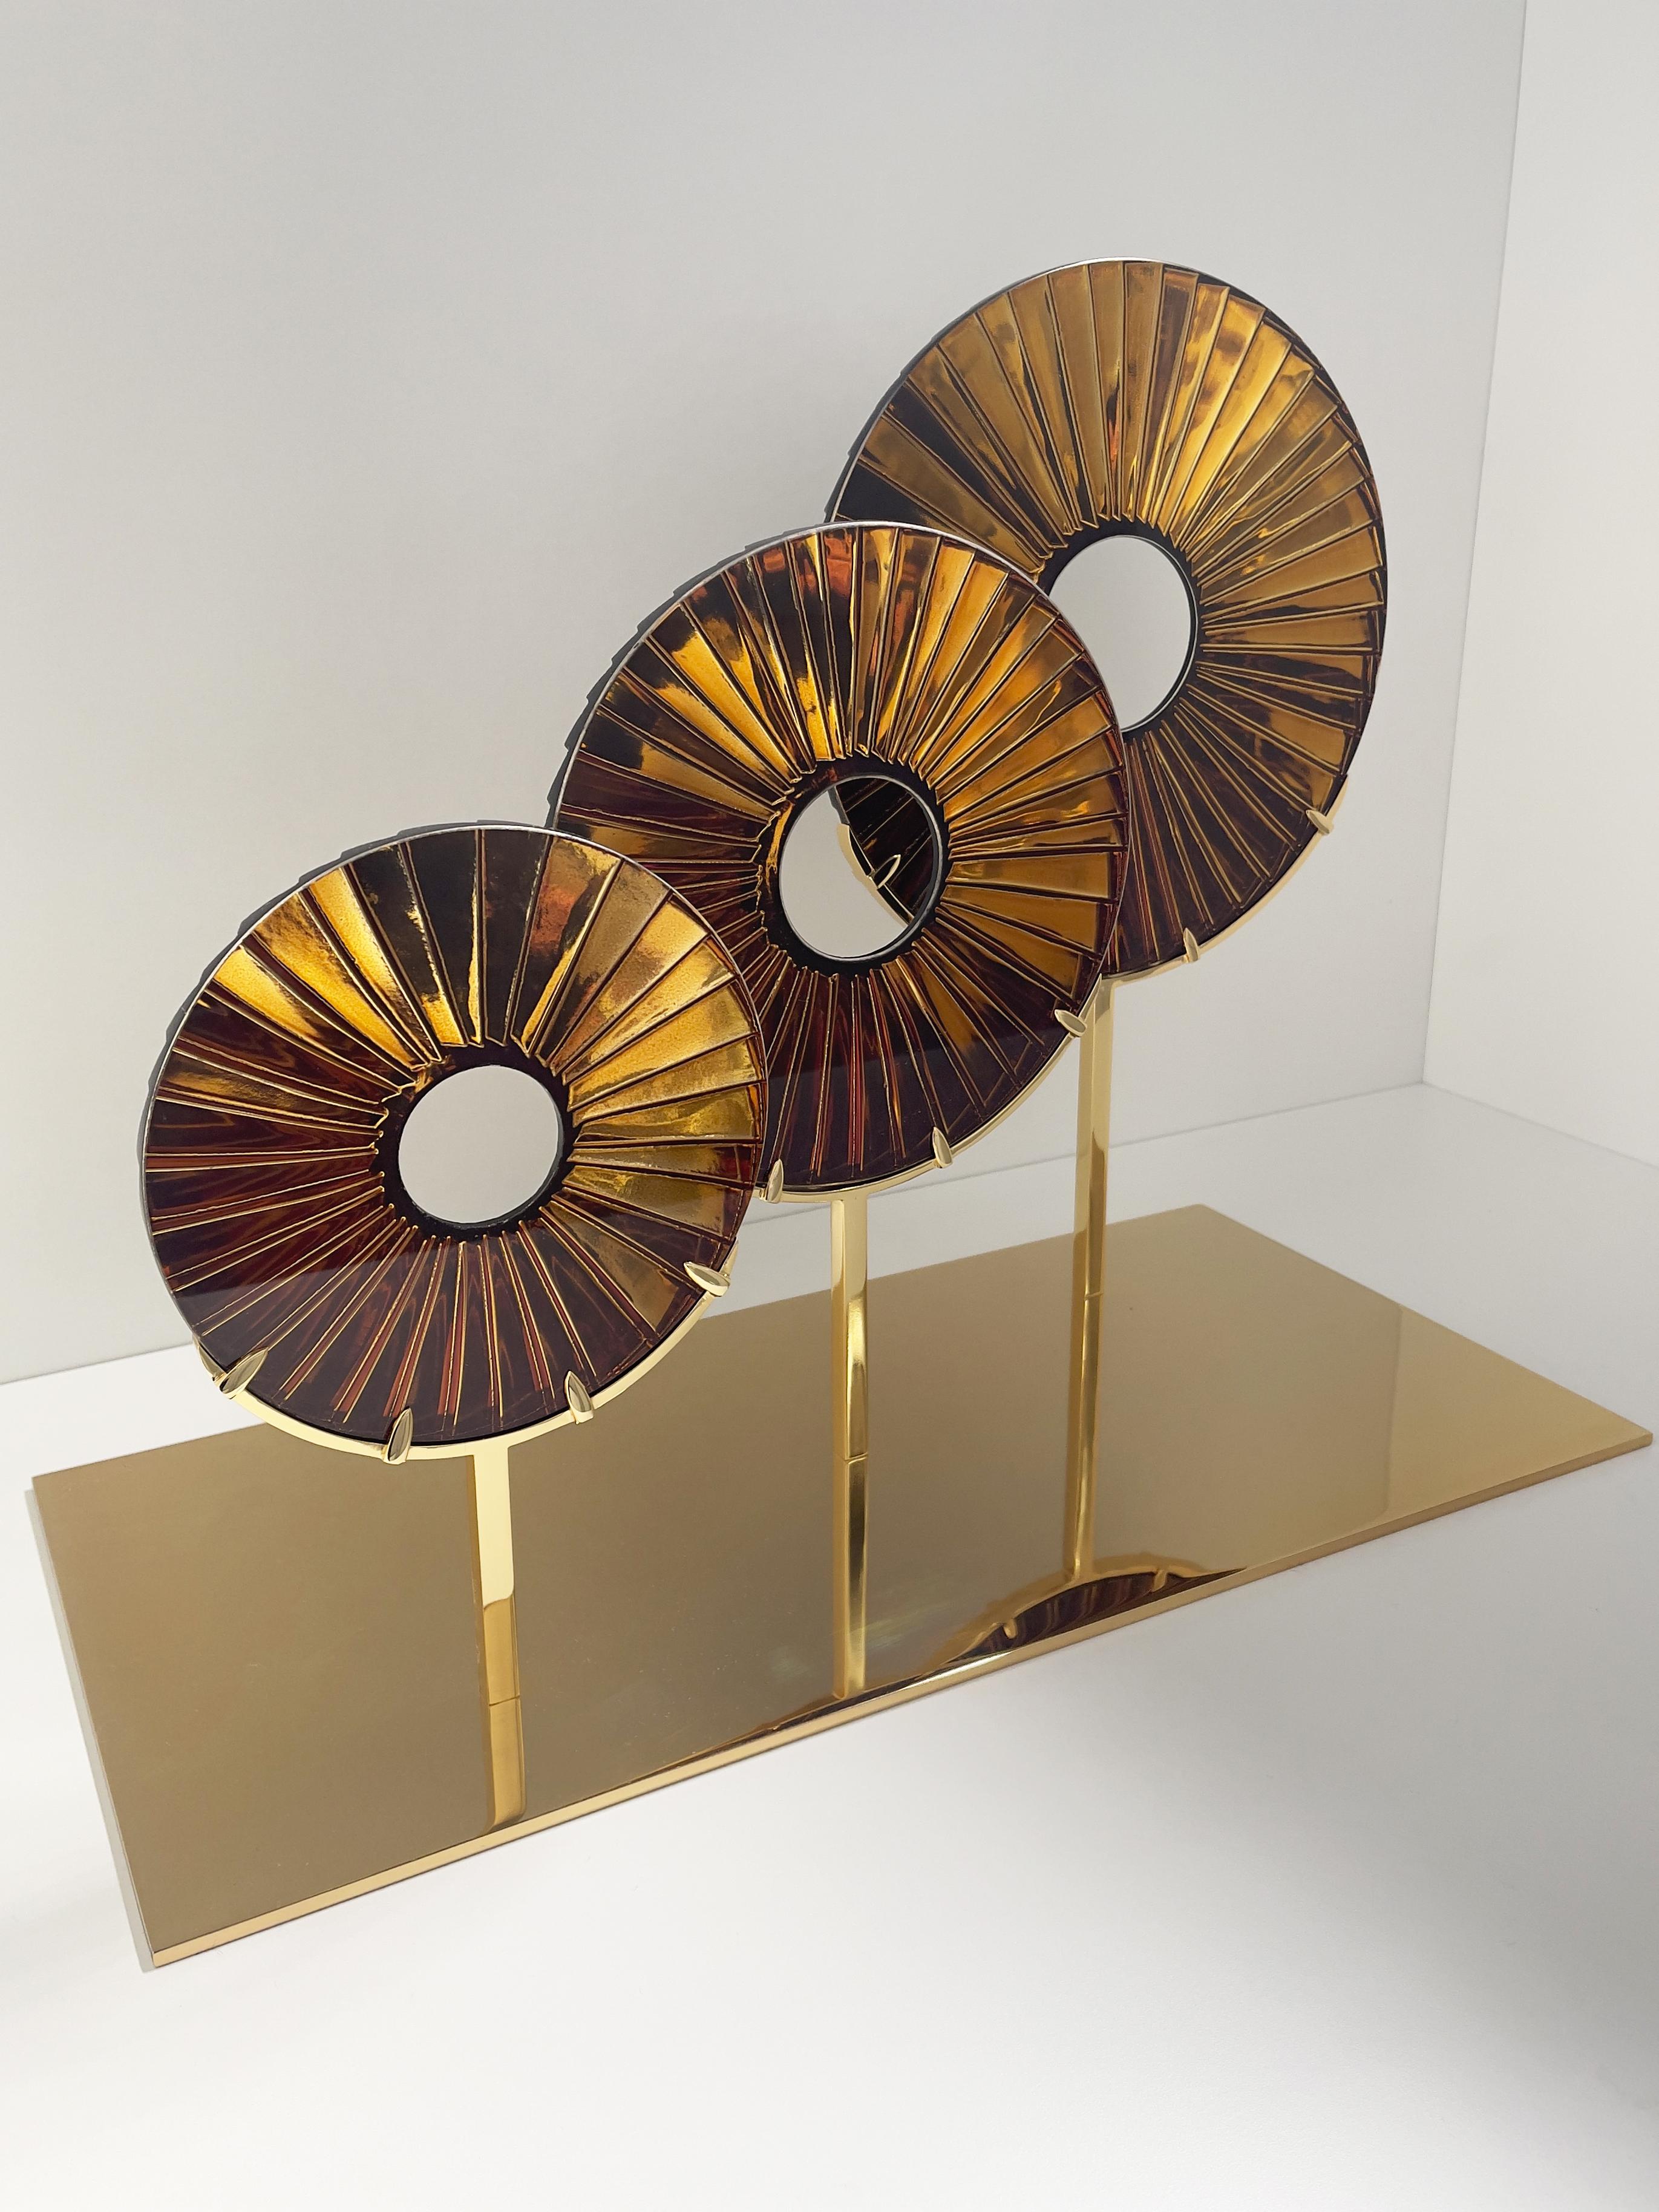 Italian Contemporary 'Three Eyes' Sculpture Amber Glass, Brass 24kt Gold by Ghiró Studio For Sale